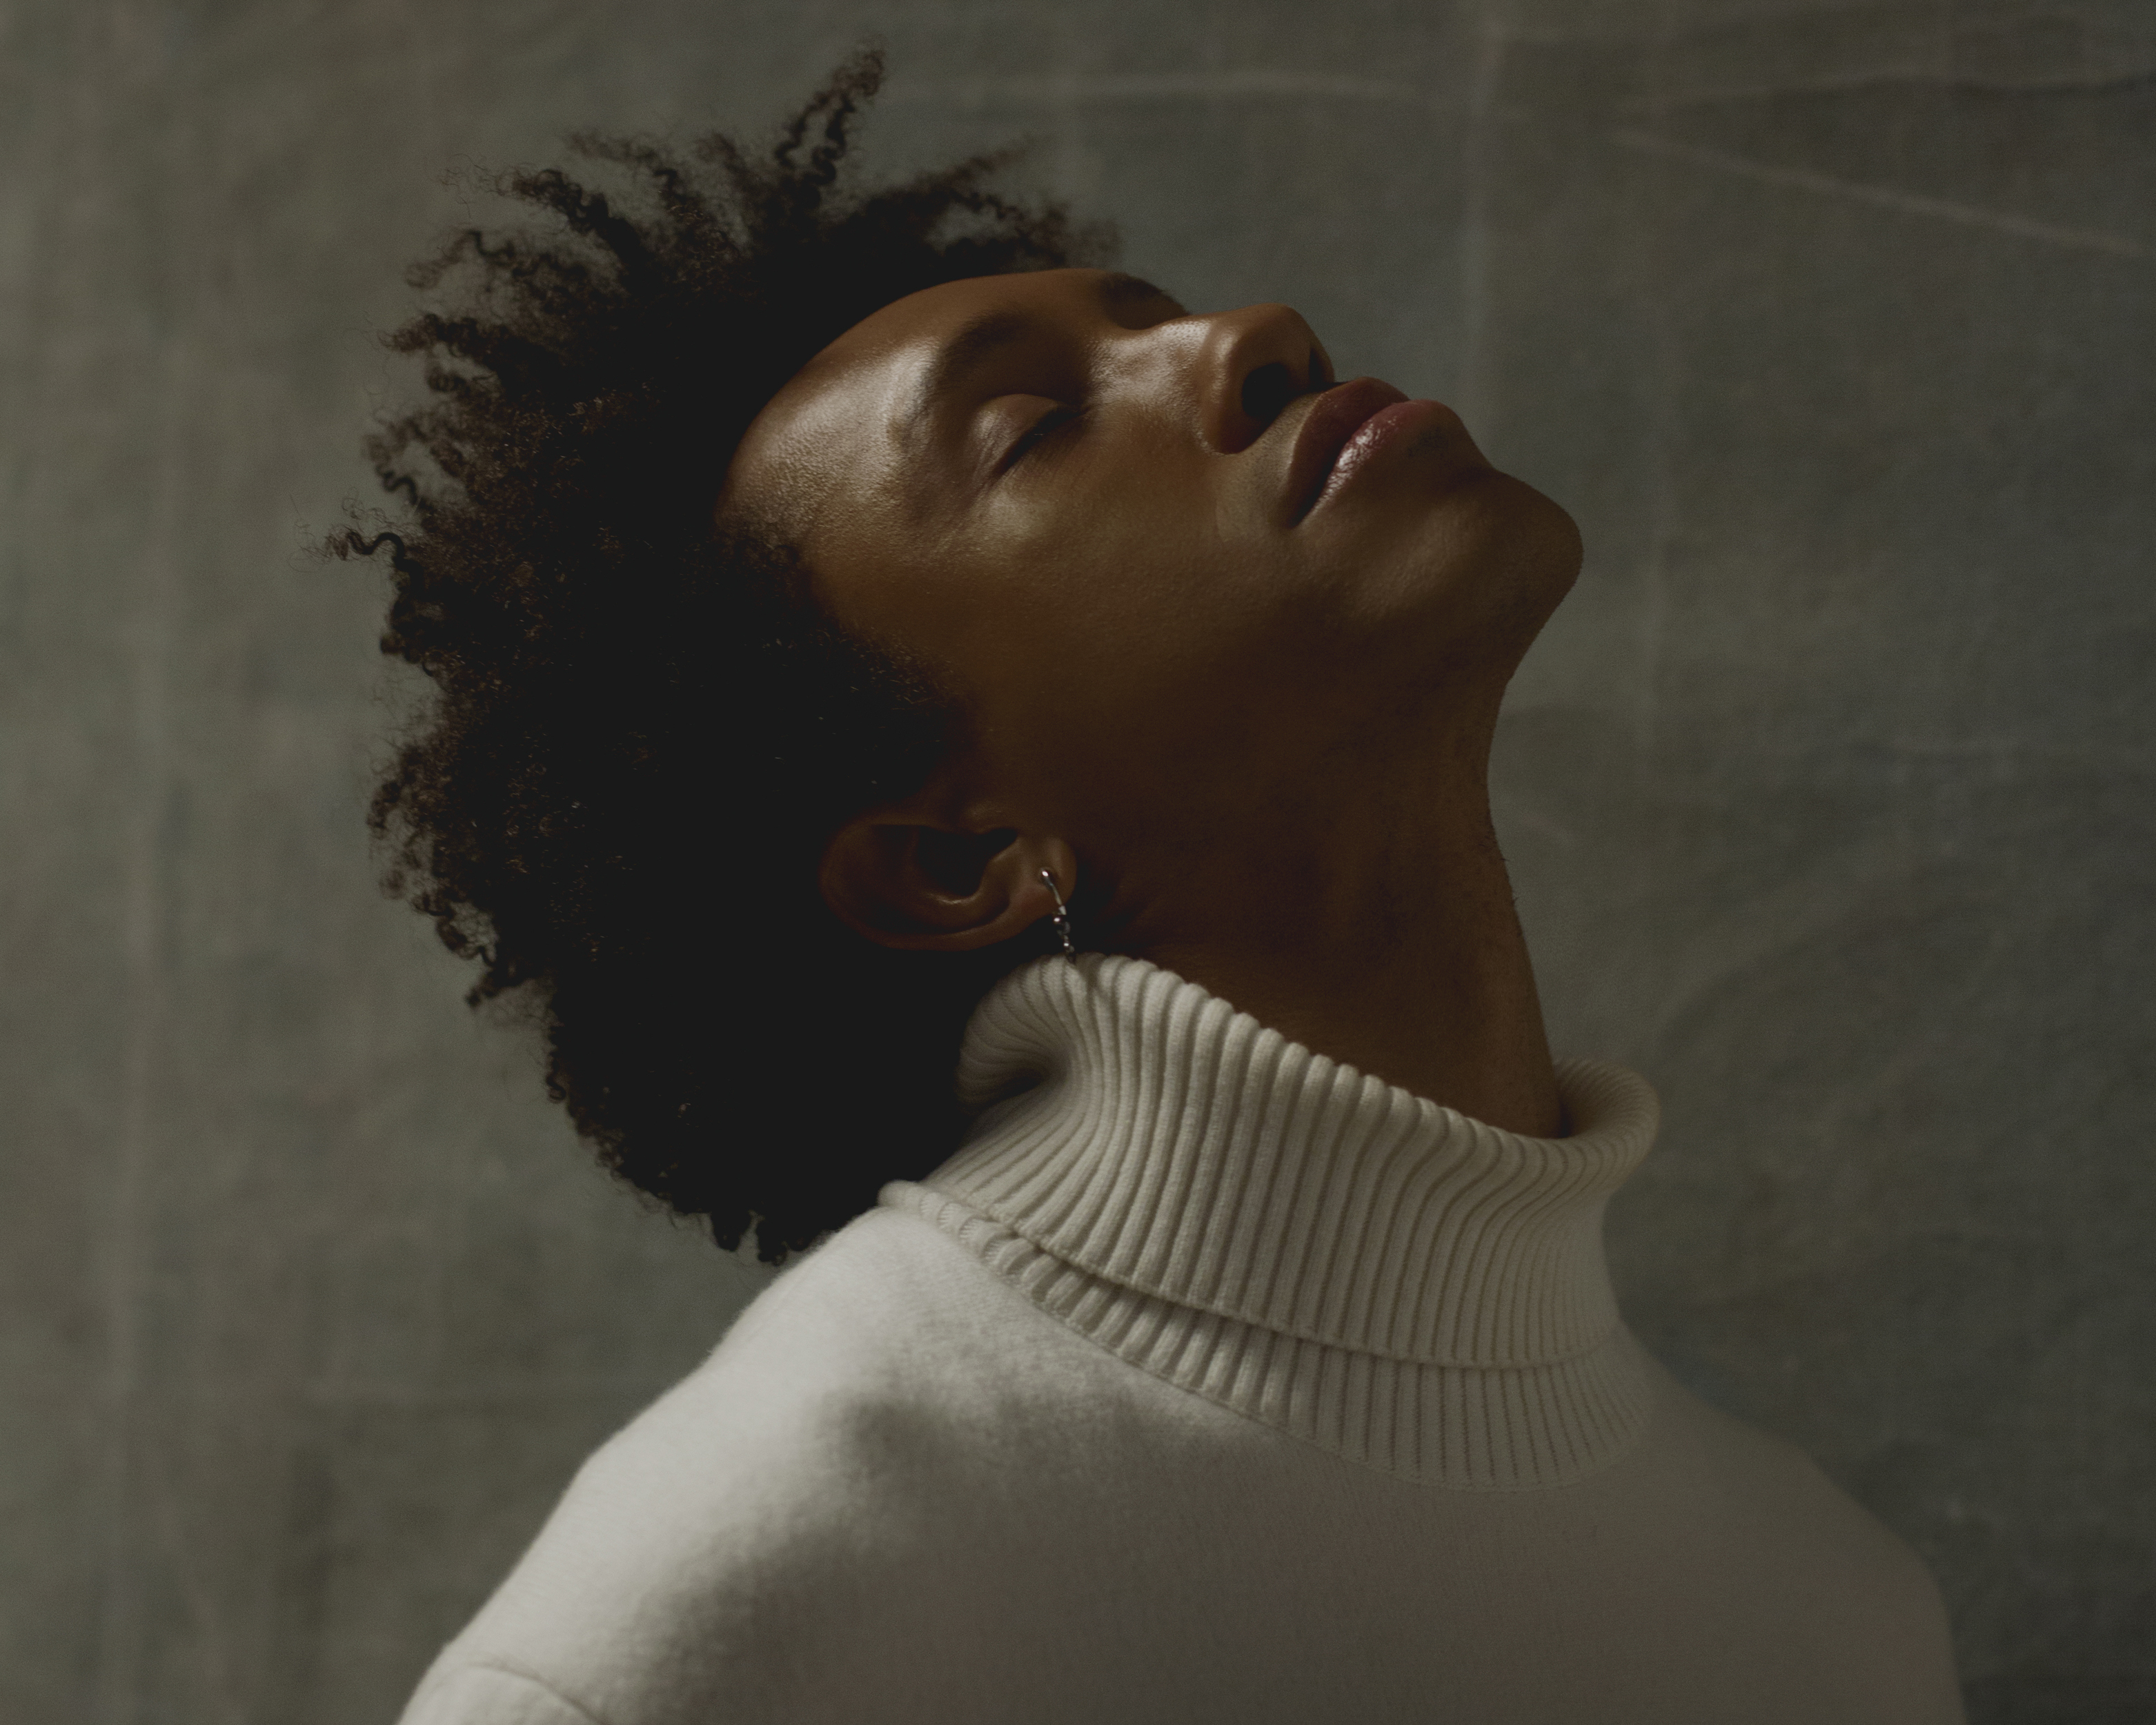 Portrait of Miles Greenberg in a white turtleneck sweater against a dark green wall with his eyes closed and head tilted upwards.